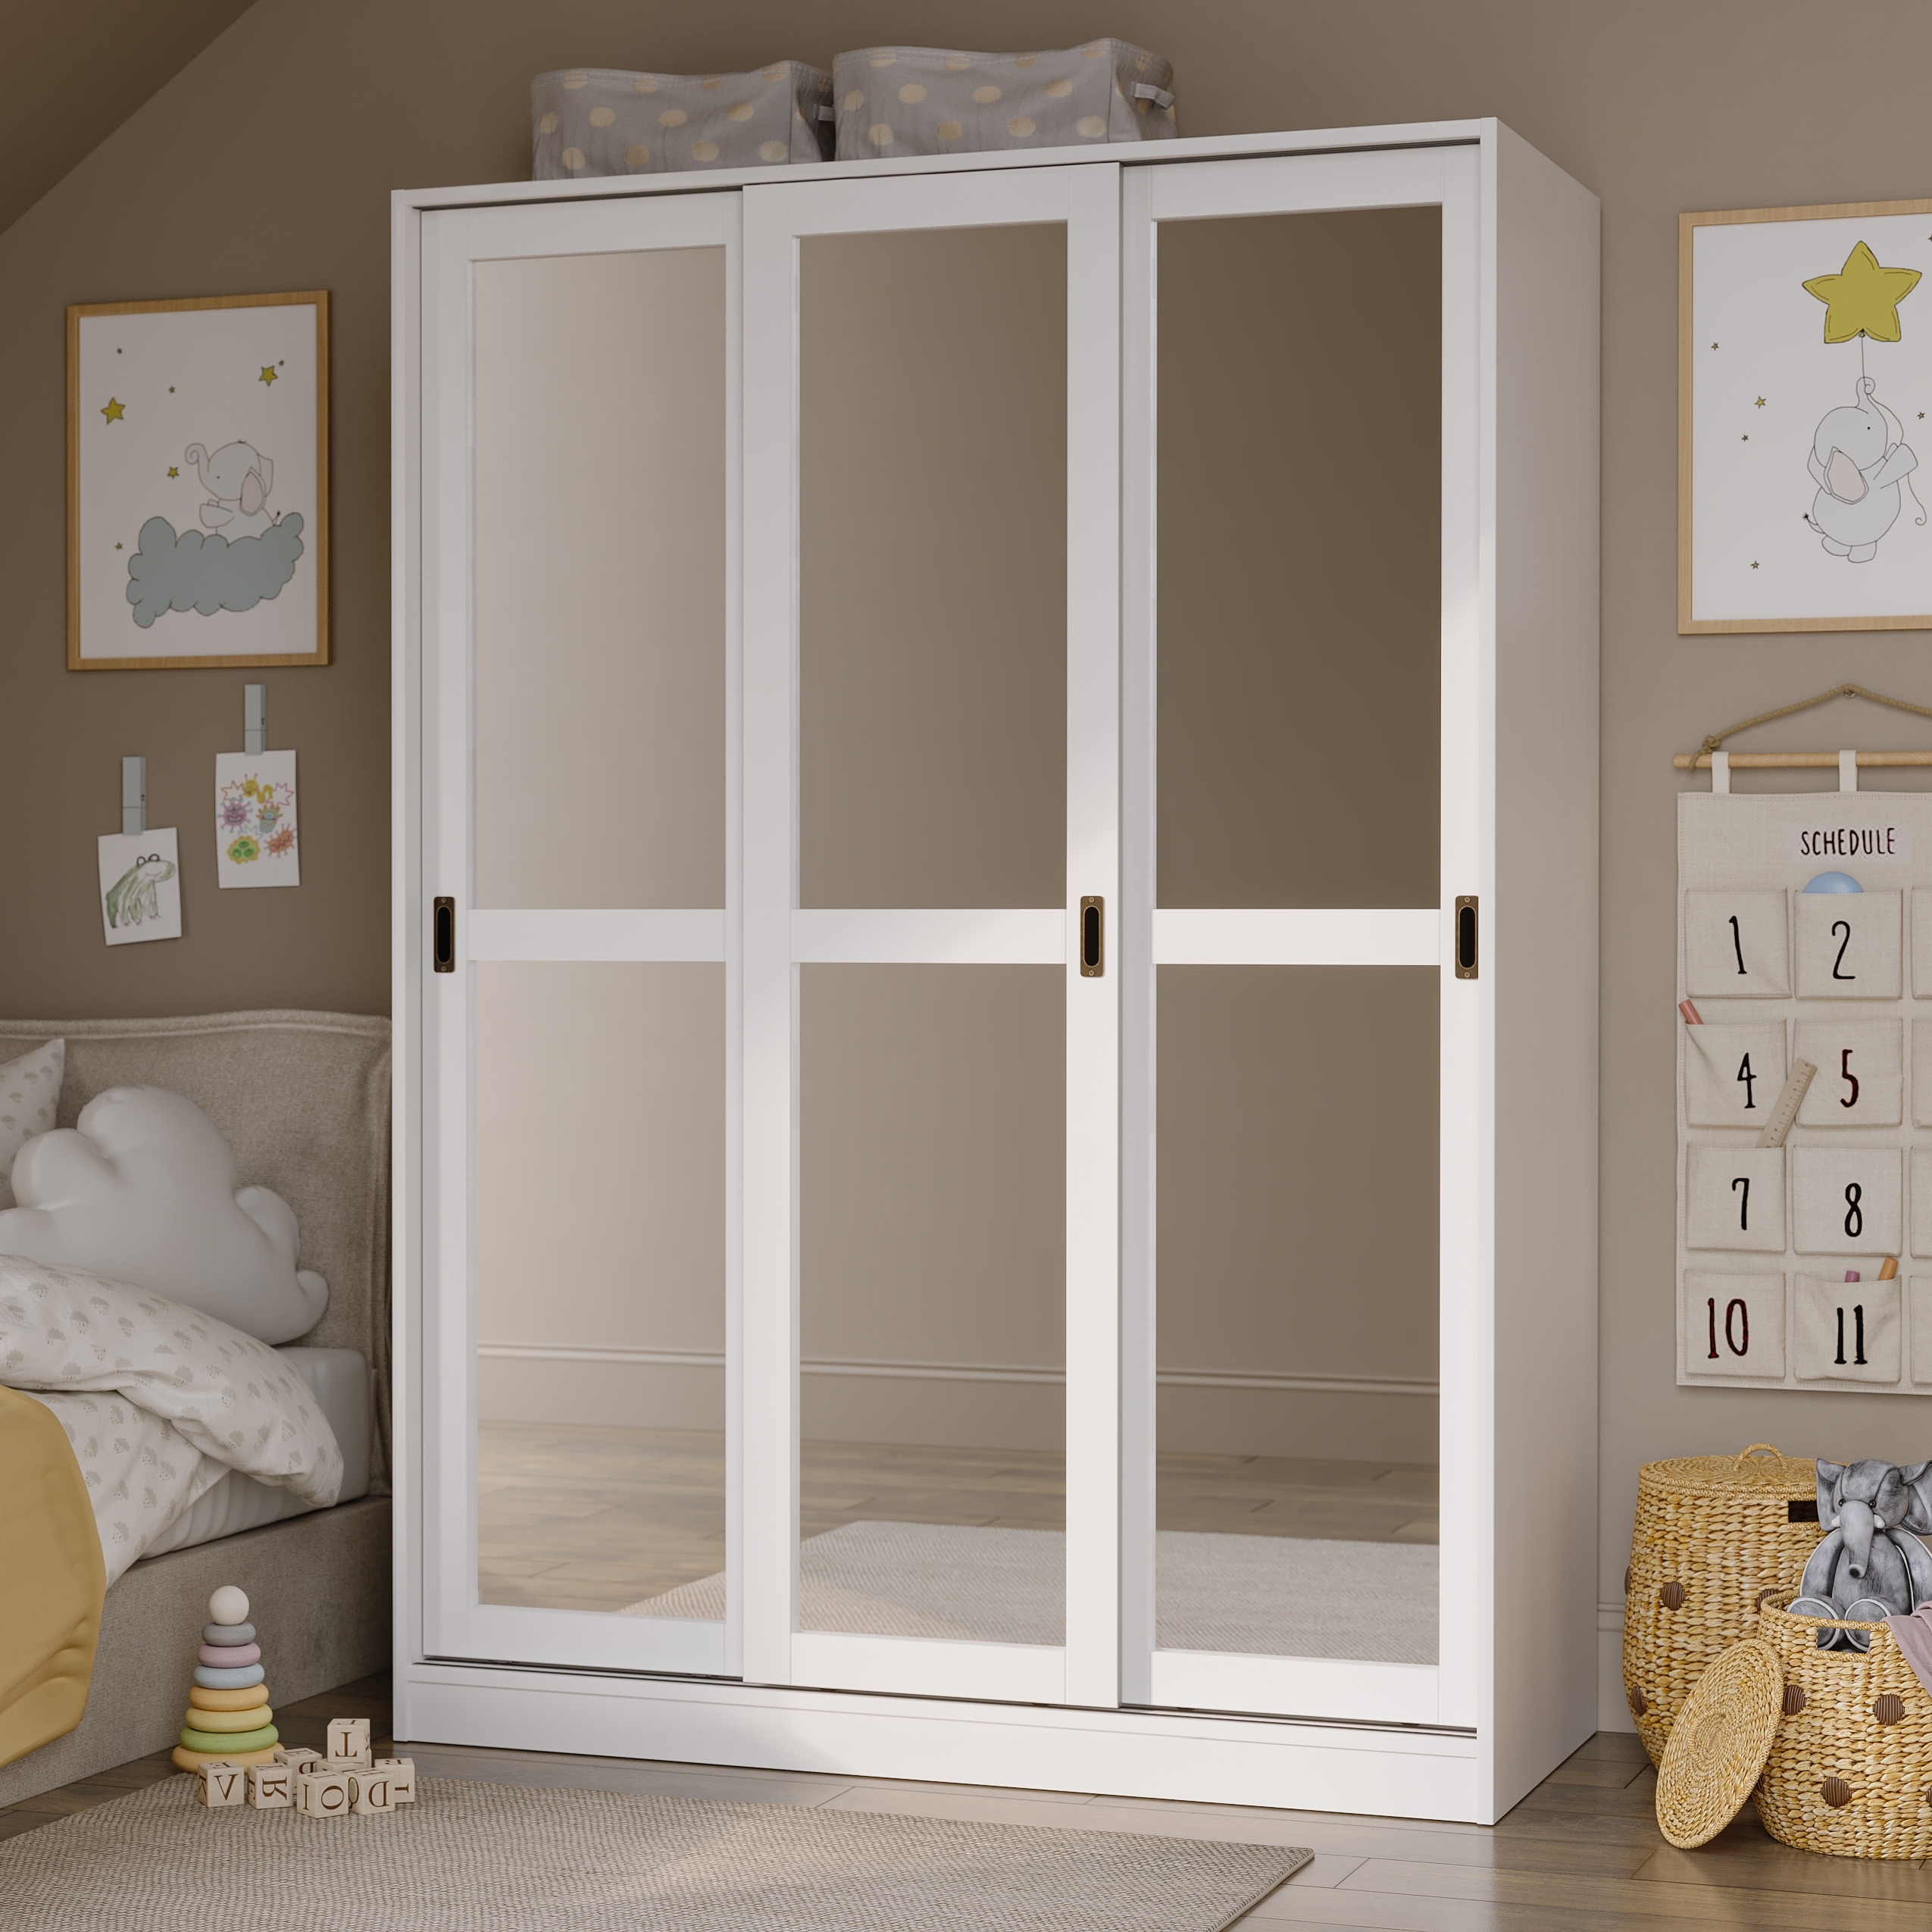 URTR White Armoire Wardrobe Tall Cabinet 3 Partitions to Separate 4 Storage Spaces (29.5 in. W x 15.7 in. D x 70.8 in. H)